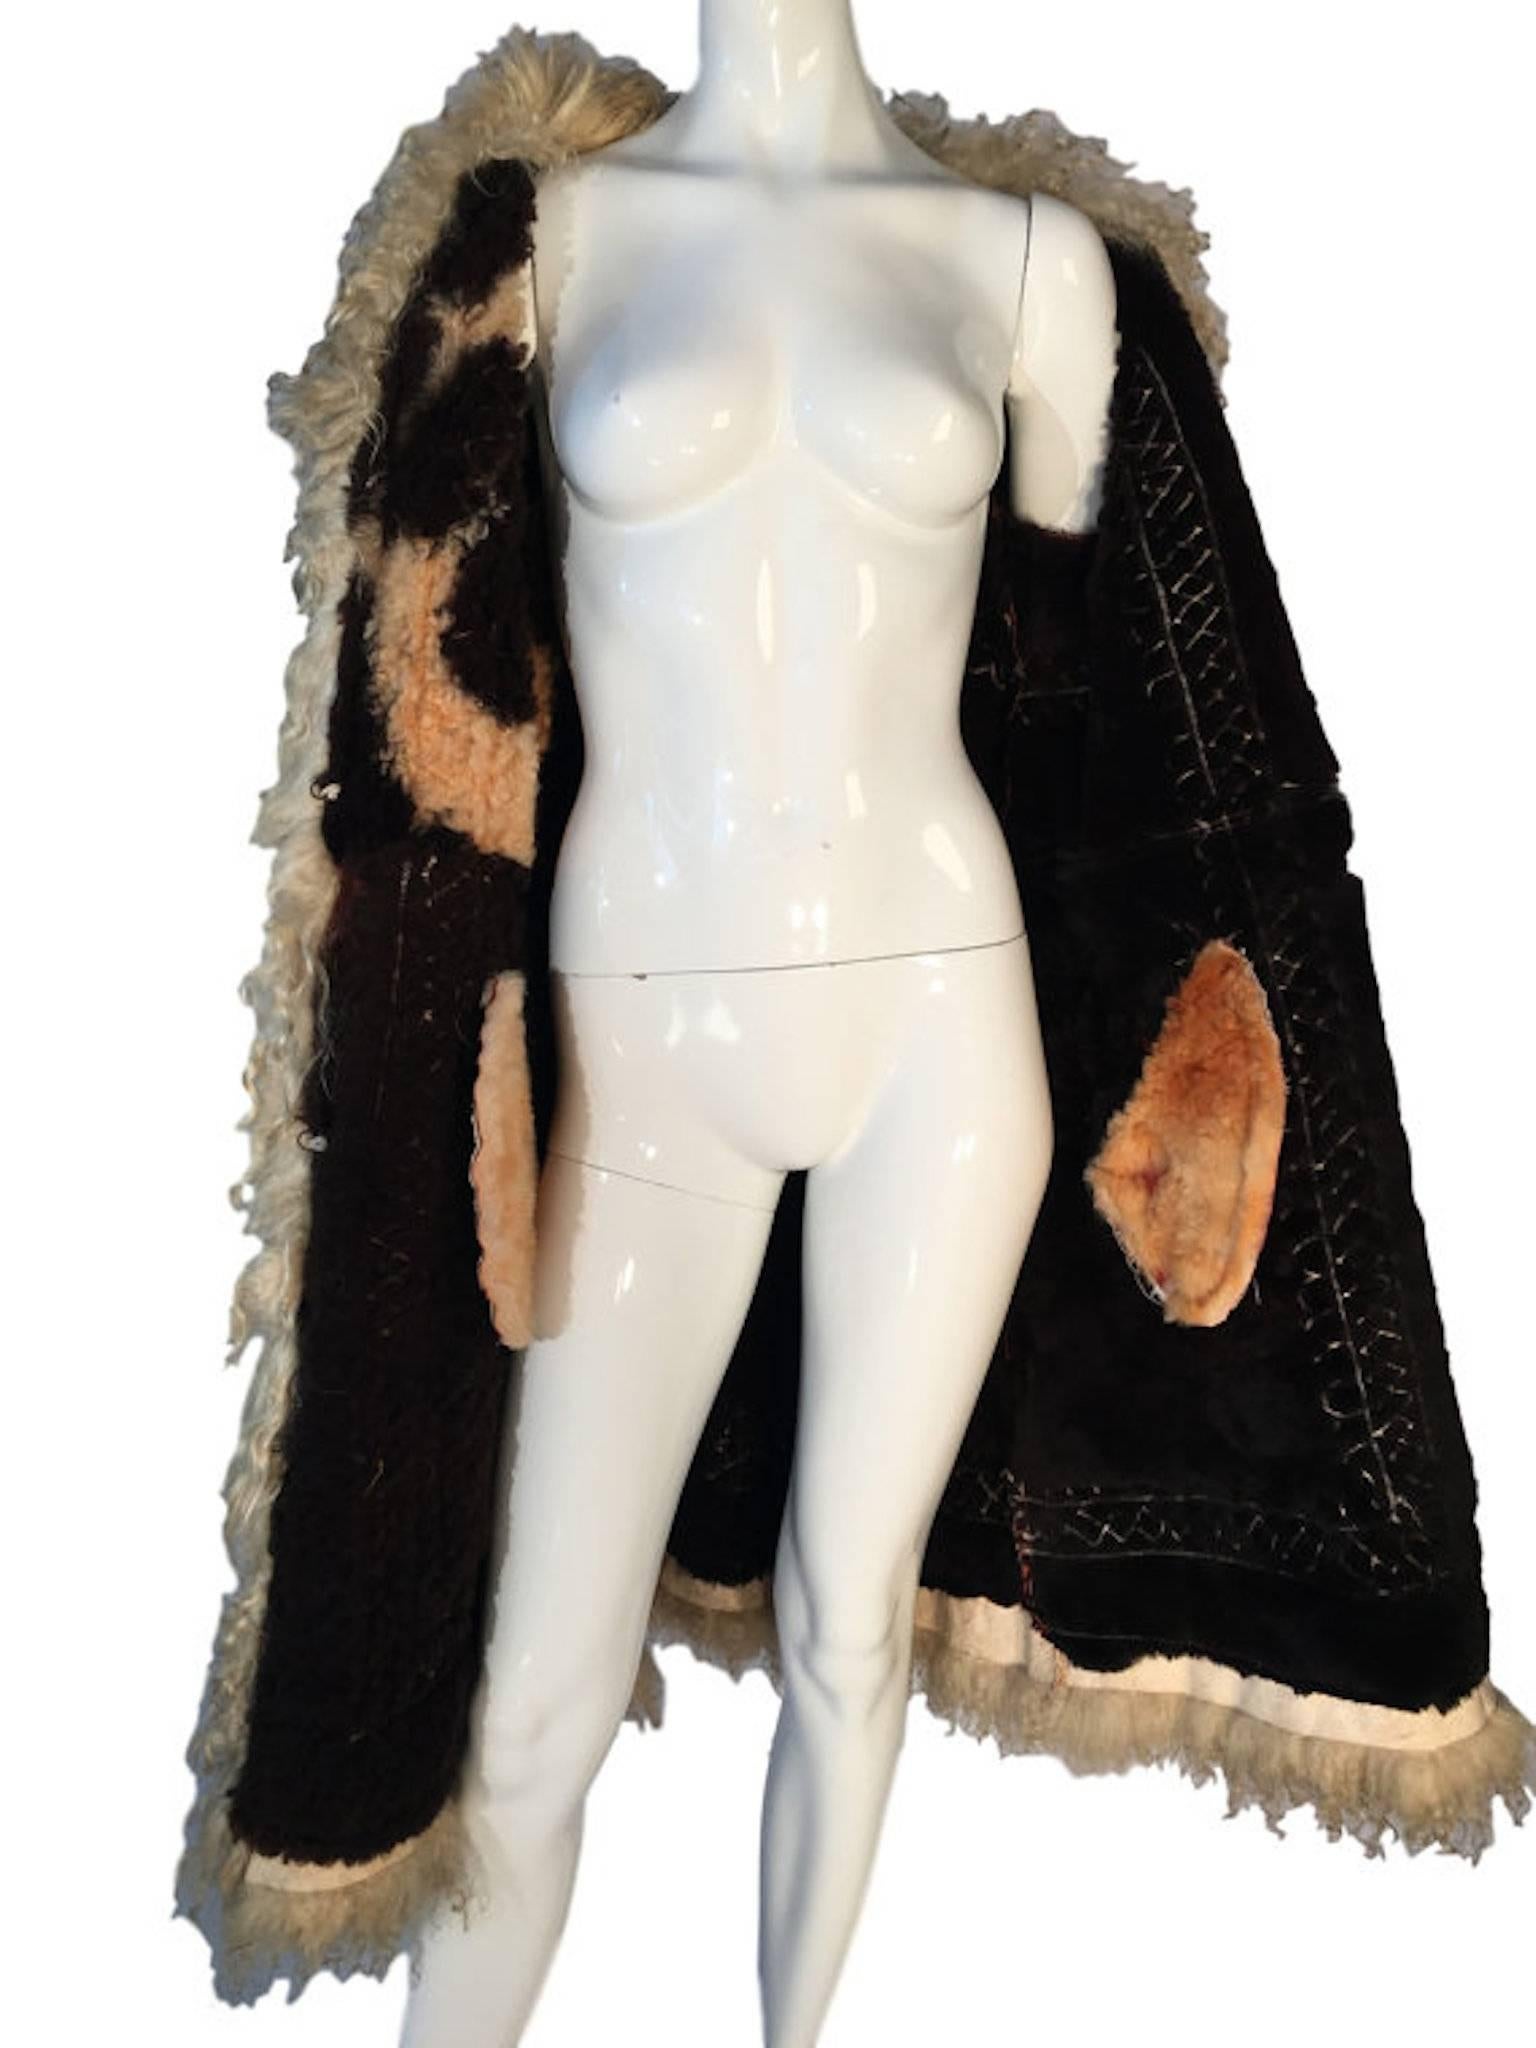 Original 1970's afghan sheepskin and suede coat with embroidery, beautifully lined with sheepskin shearling in different shades, embroidered with flowers and beautiful trim on cuffs opening of coat. Has hook/eye fastening.

Size UK 12-14,